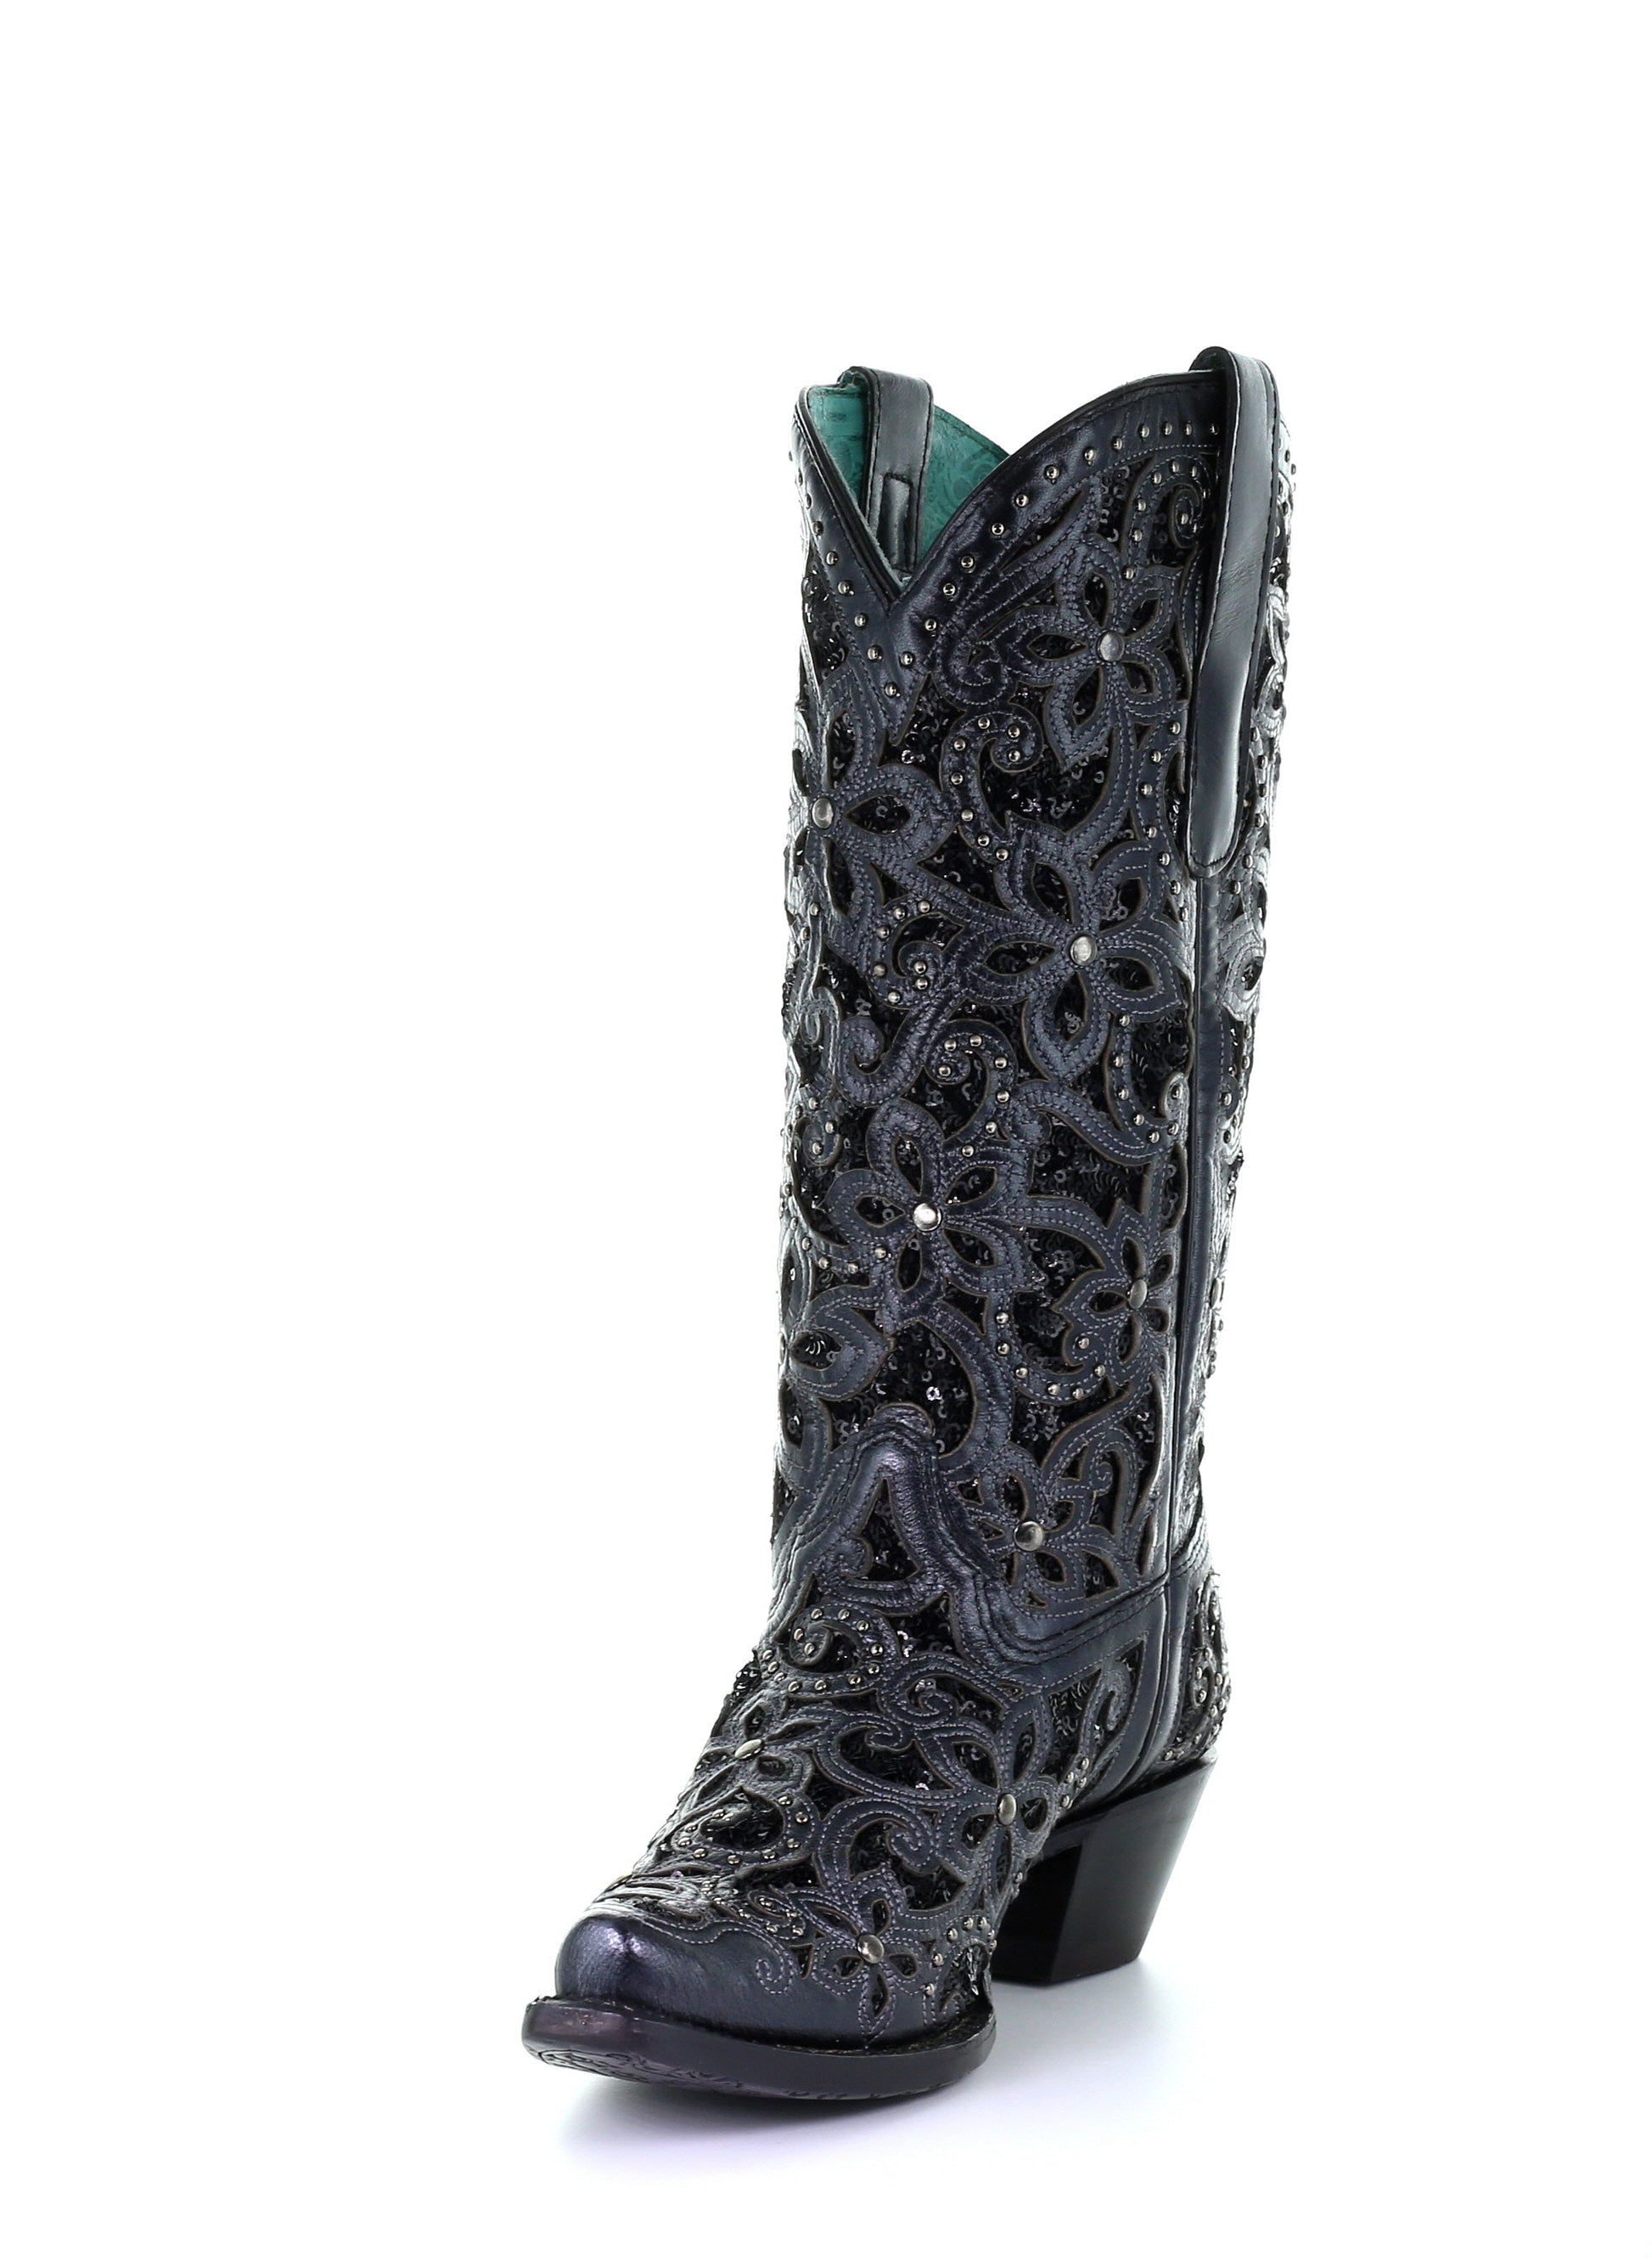 A3752 - Corral black western cowgirl leather boots for women-Kuet.us